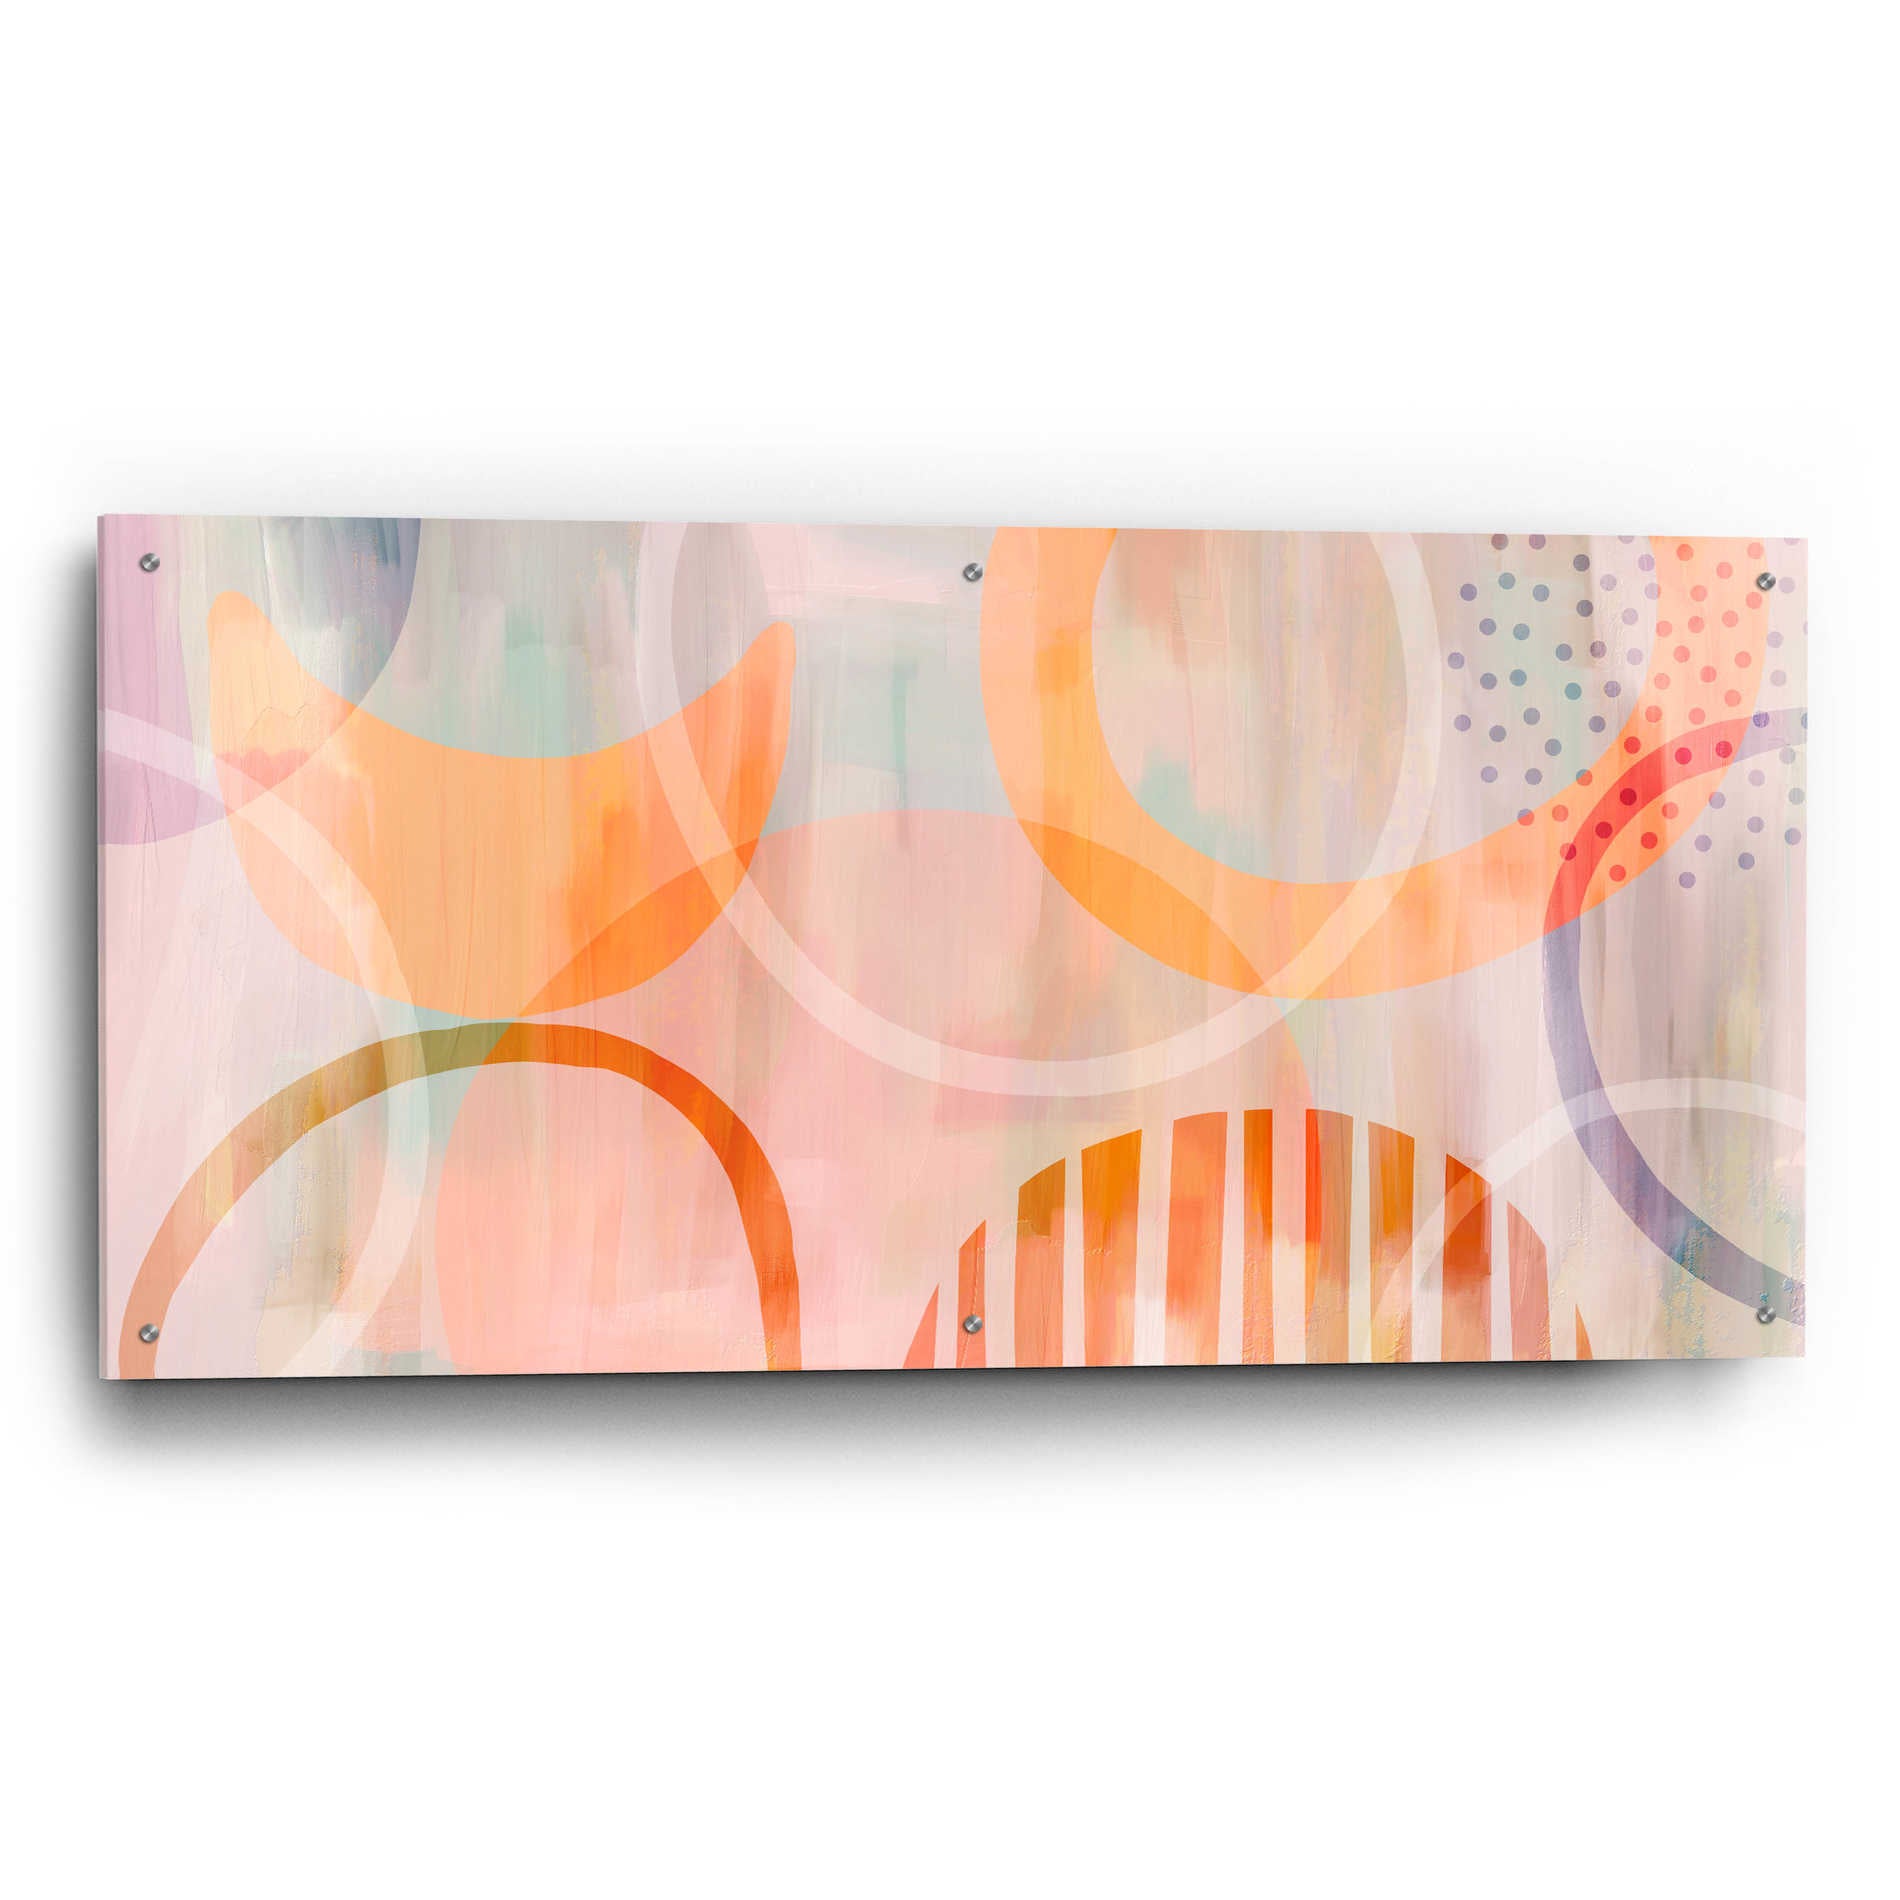 Epic Art 'Summer Tales' by Andrea Haase Acrylic Glass Wall Art,48x24